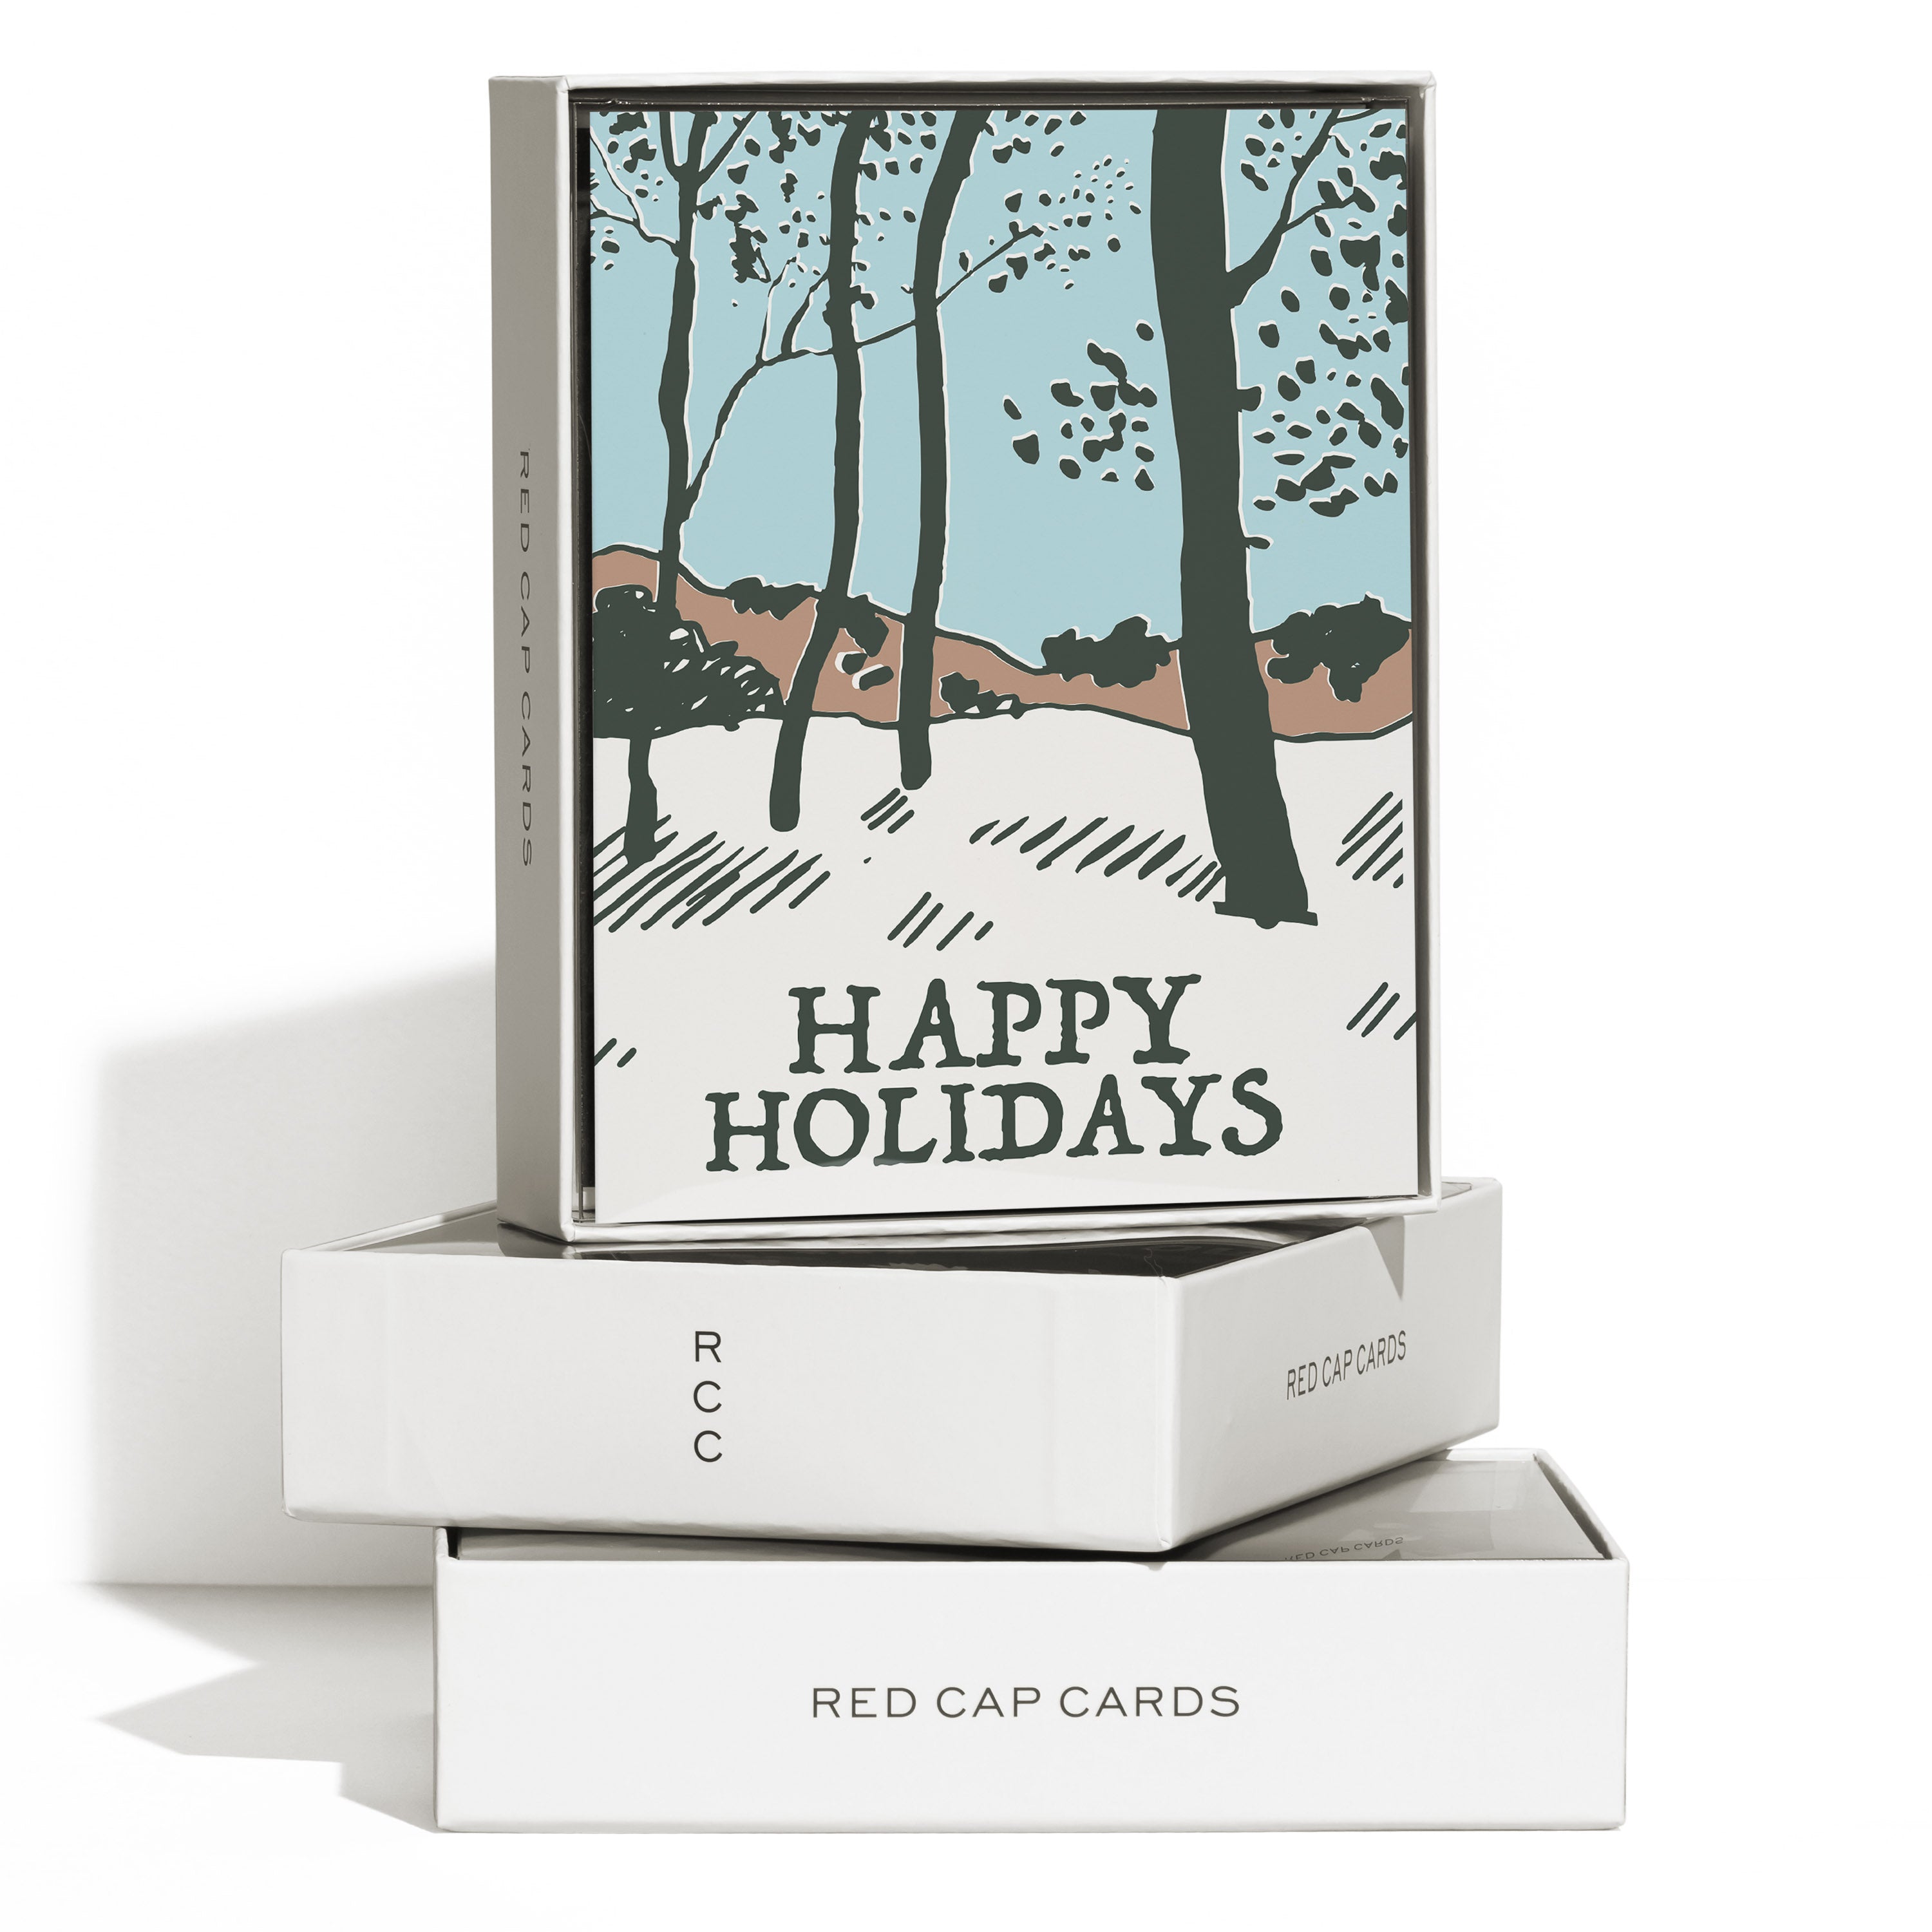 Snowy Forest greeting card